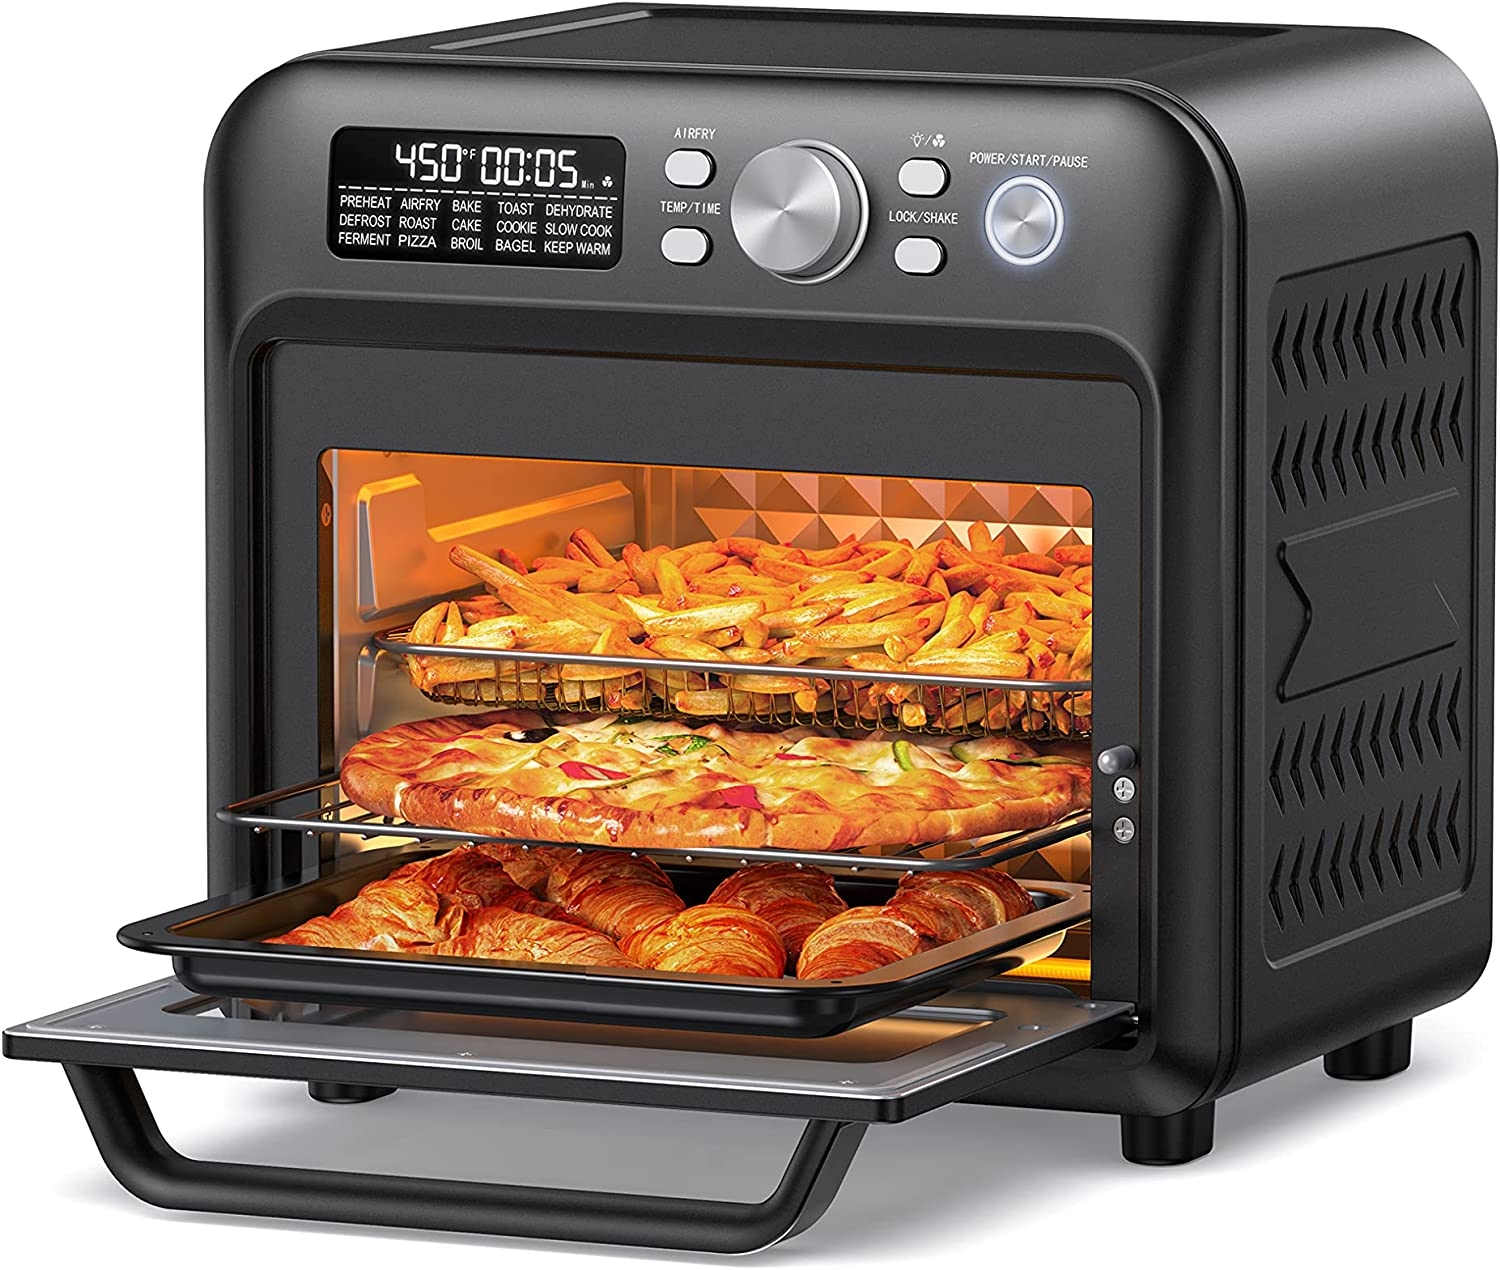 PARIS RHÔNE Air Fryer Oven 19QT, Family-Sized Toaster Oven, Convection Oven with Child Lock, Fits 12-inch Pizza, 6-Slice Toast,